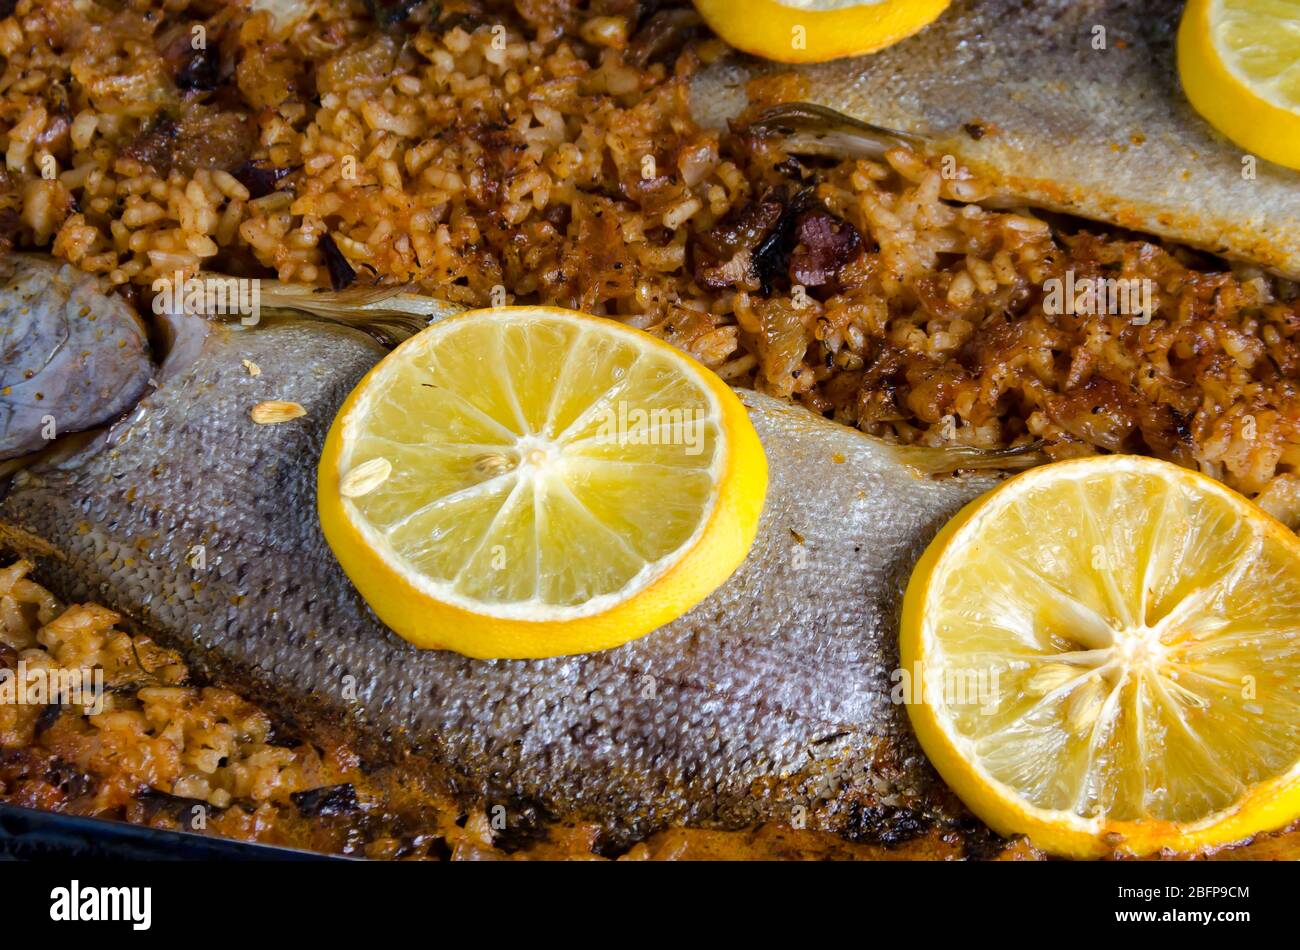 Roasted trout fish on rice and lemon slices on top, Sofia, Bulgaria Stock Photo